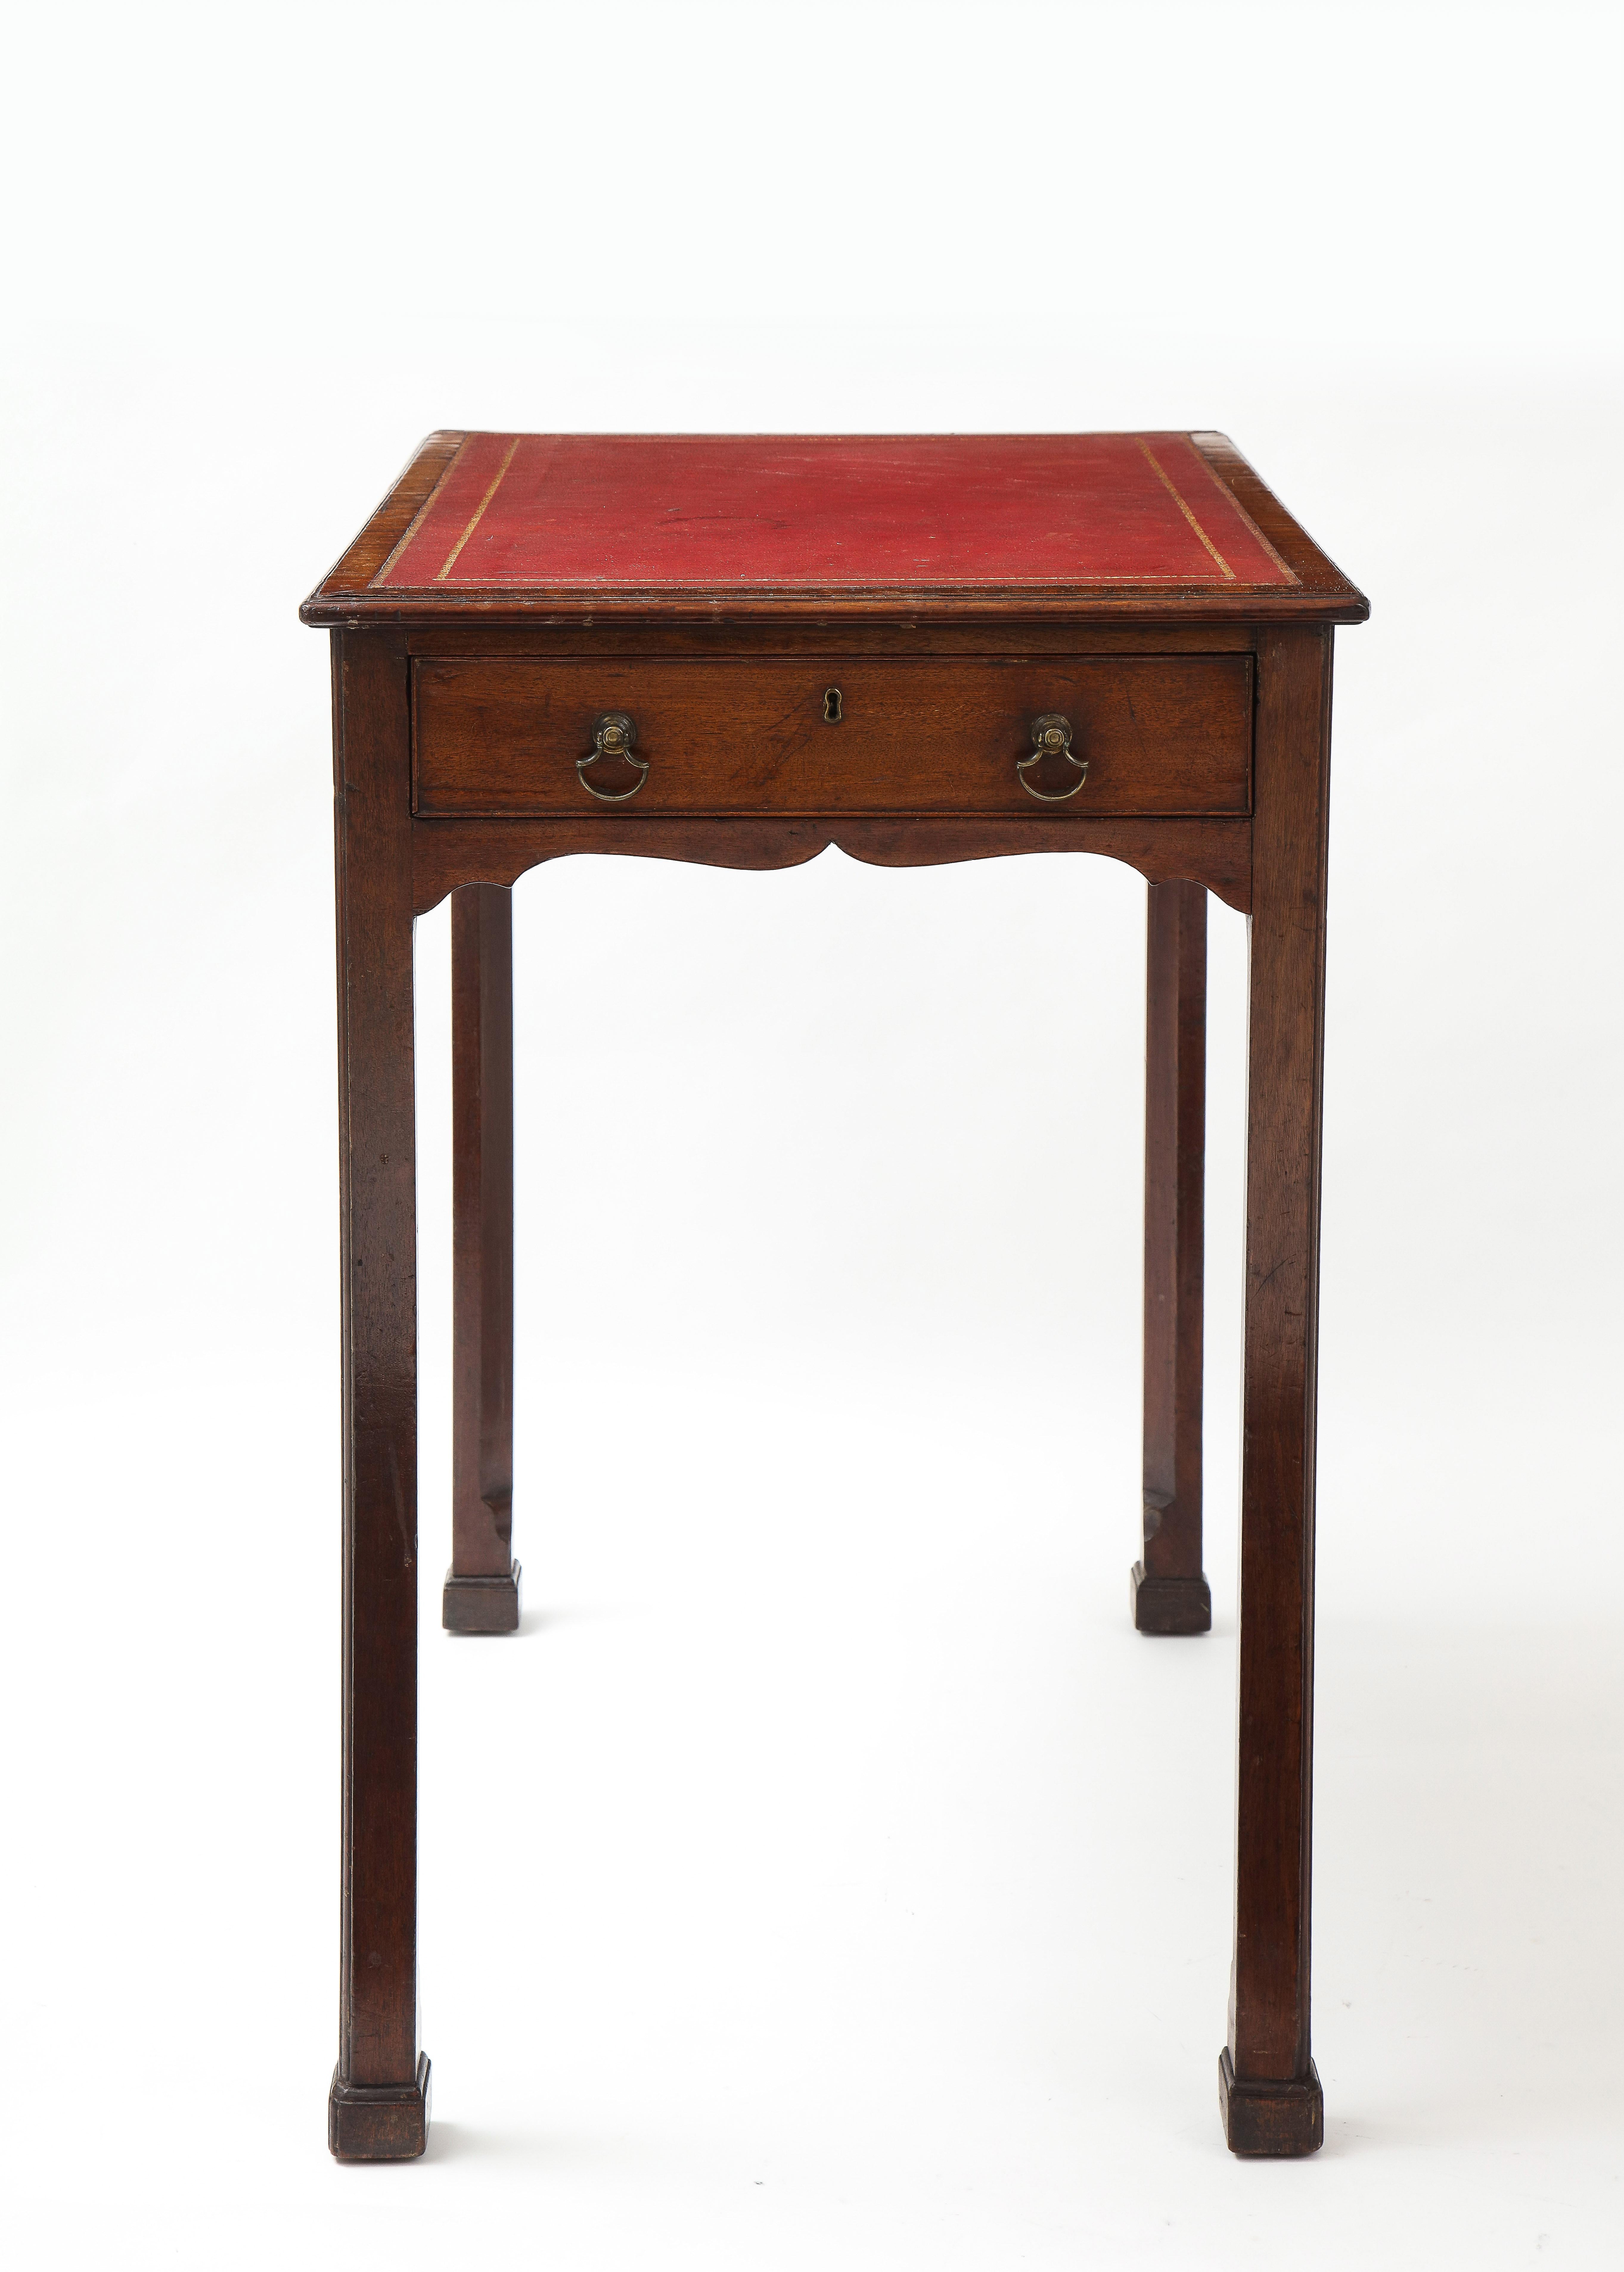 Very fine George III period mahogany diminutive writing table, the gilt tooled leather top over molded edge, the single drawer with original axe blade handles, over slightly scalloped apron and standing on square legs with inner chamfer and ending